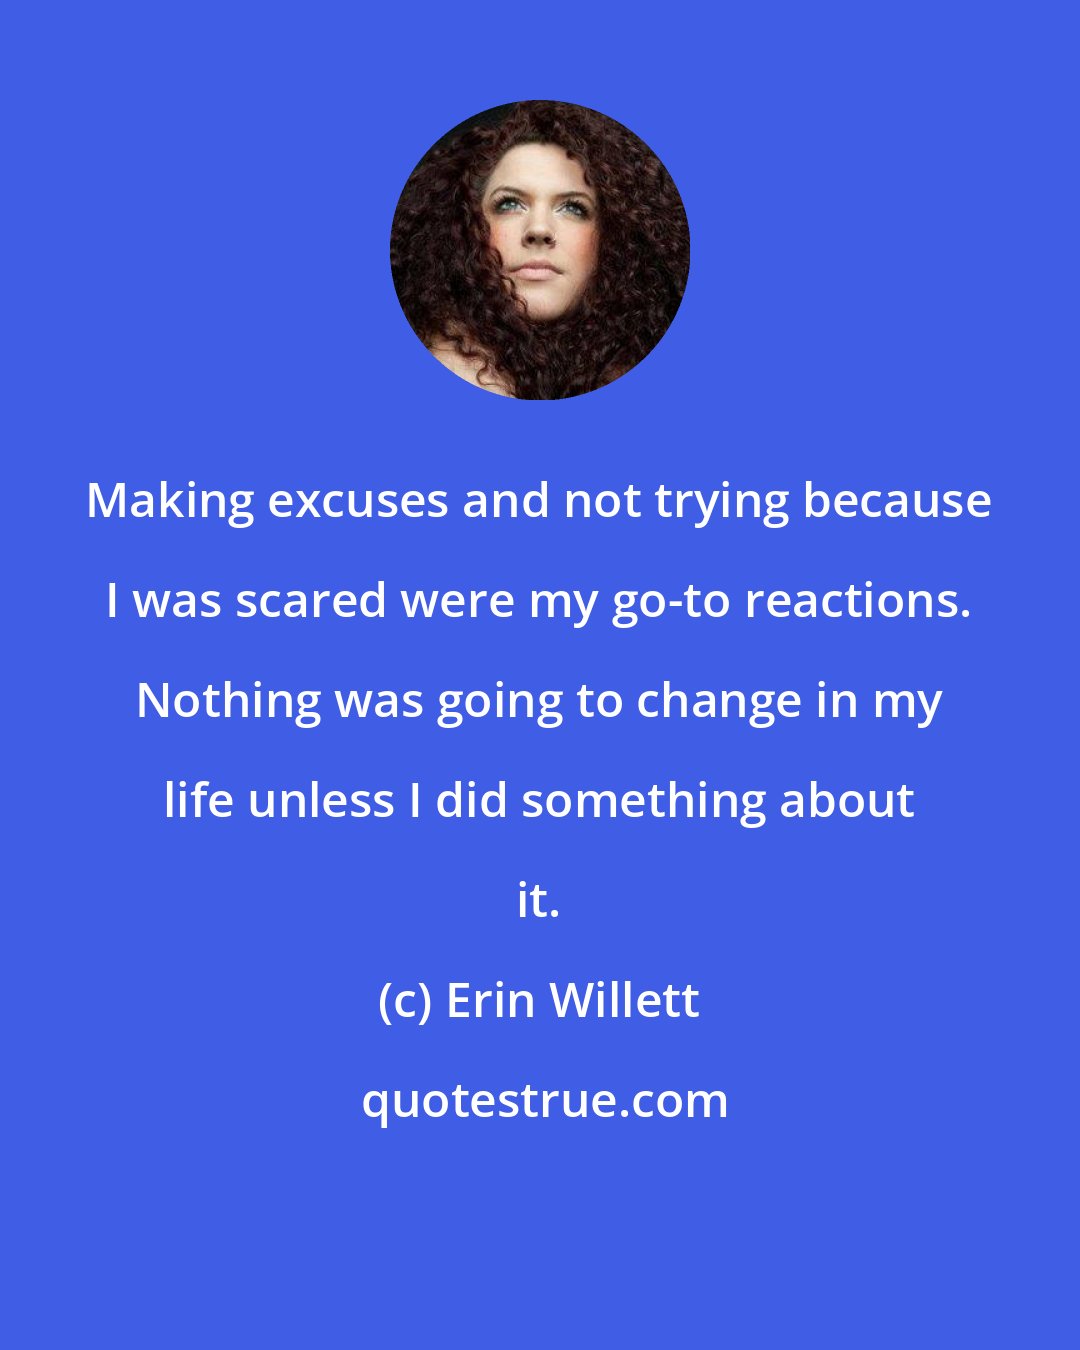 Erin Willett: Making excuses and not trying because I was scared were my go-to reactions. Nothing was going to change in my life unless I did something about it.